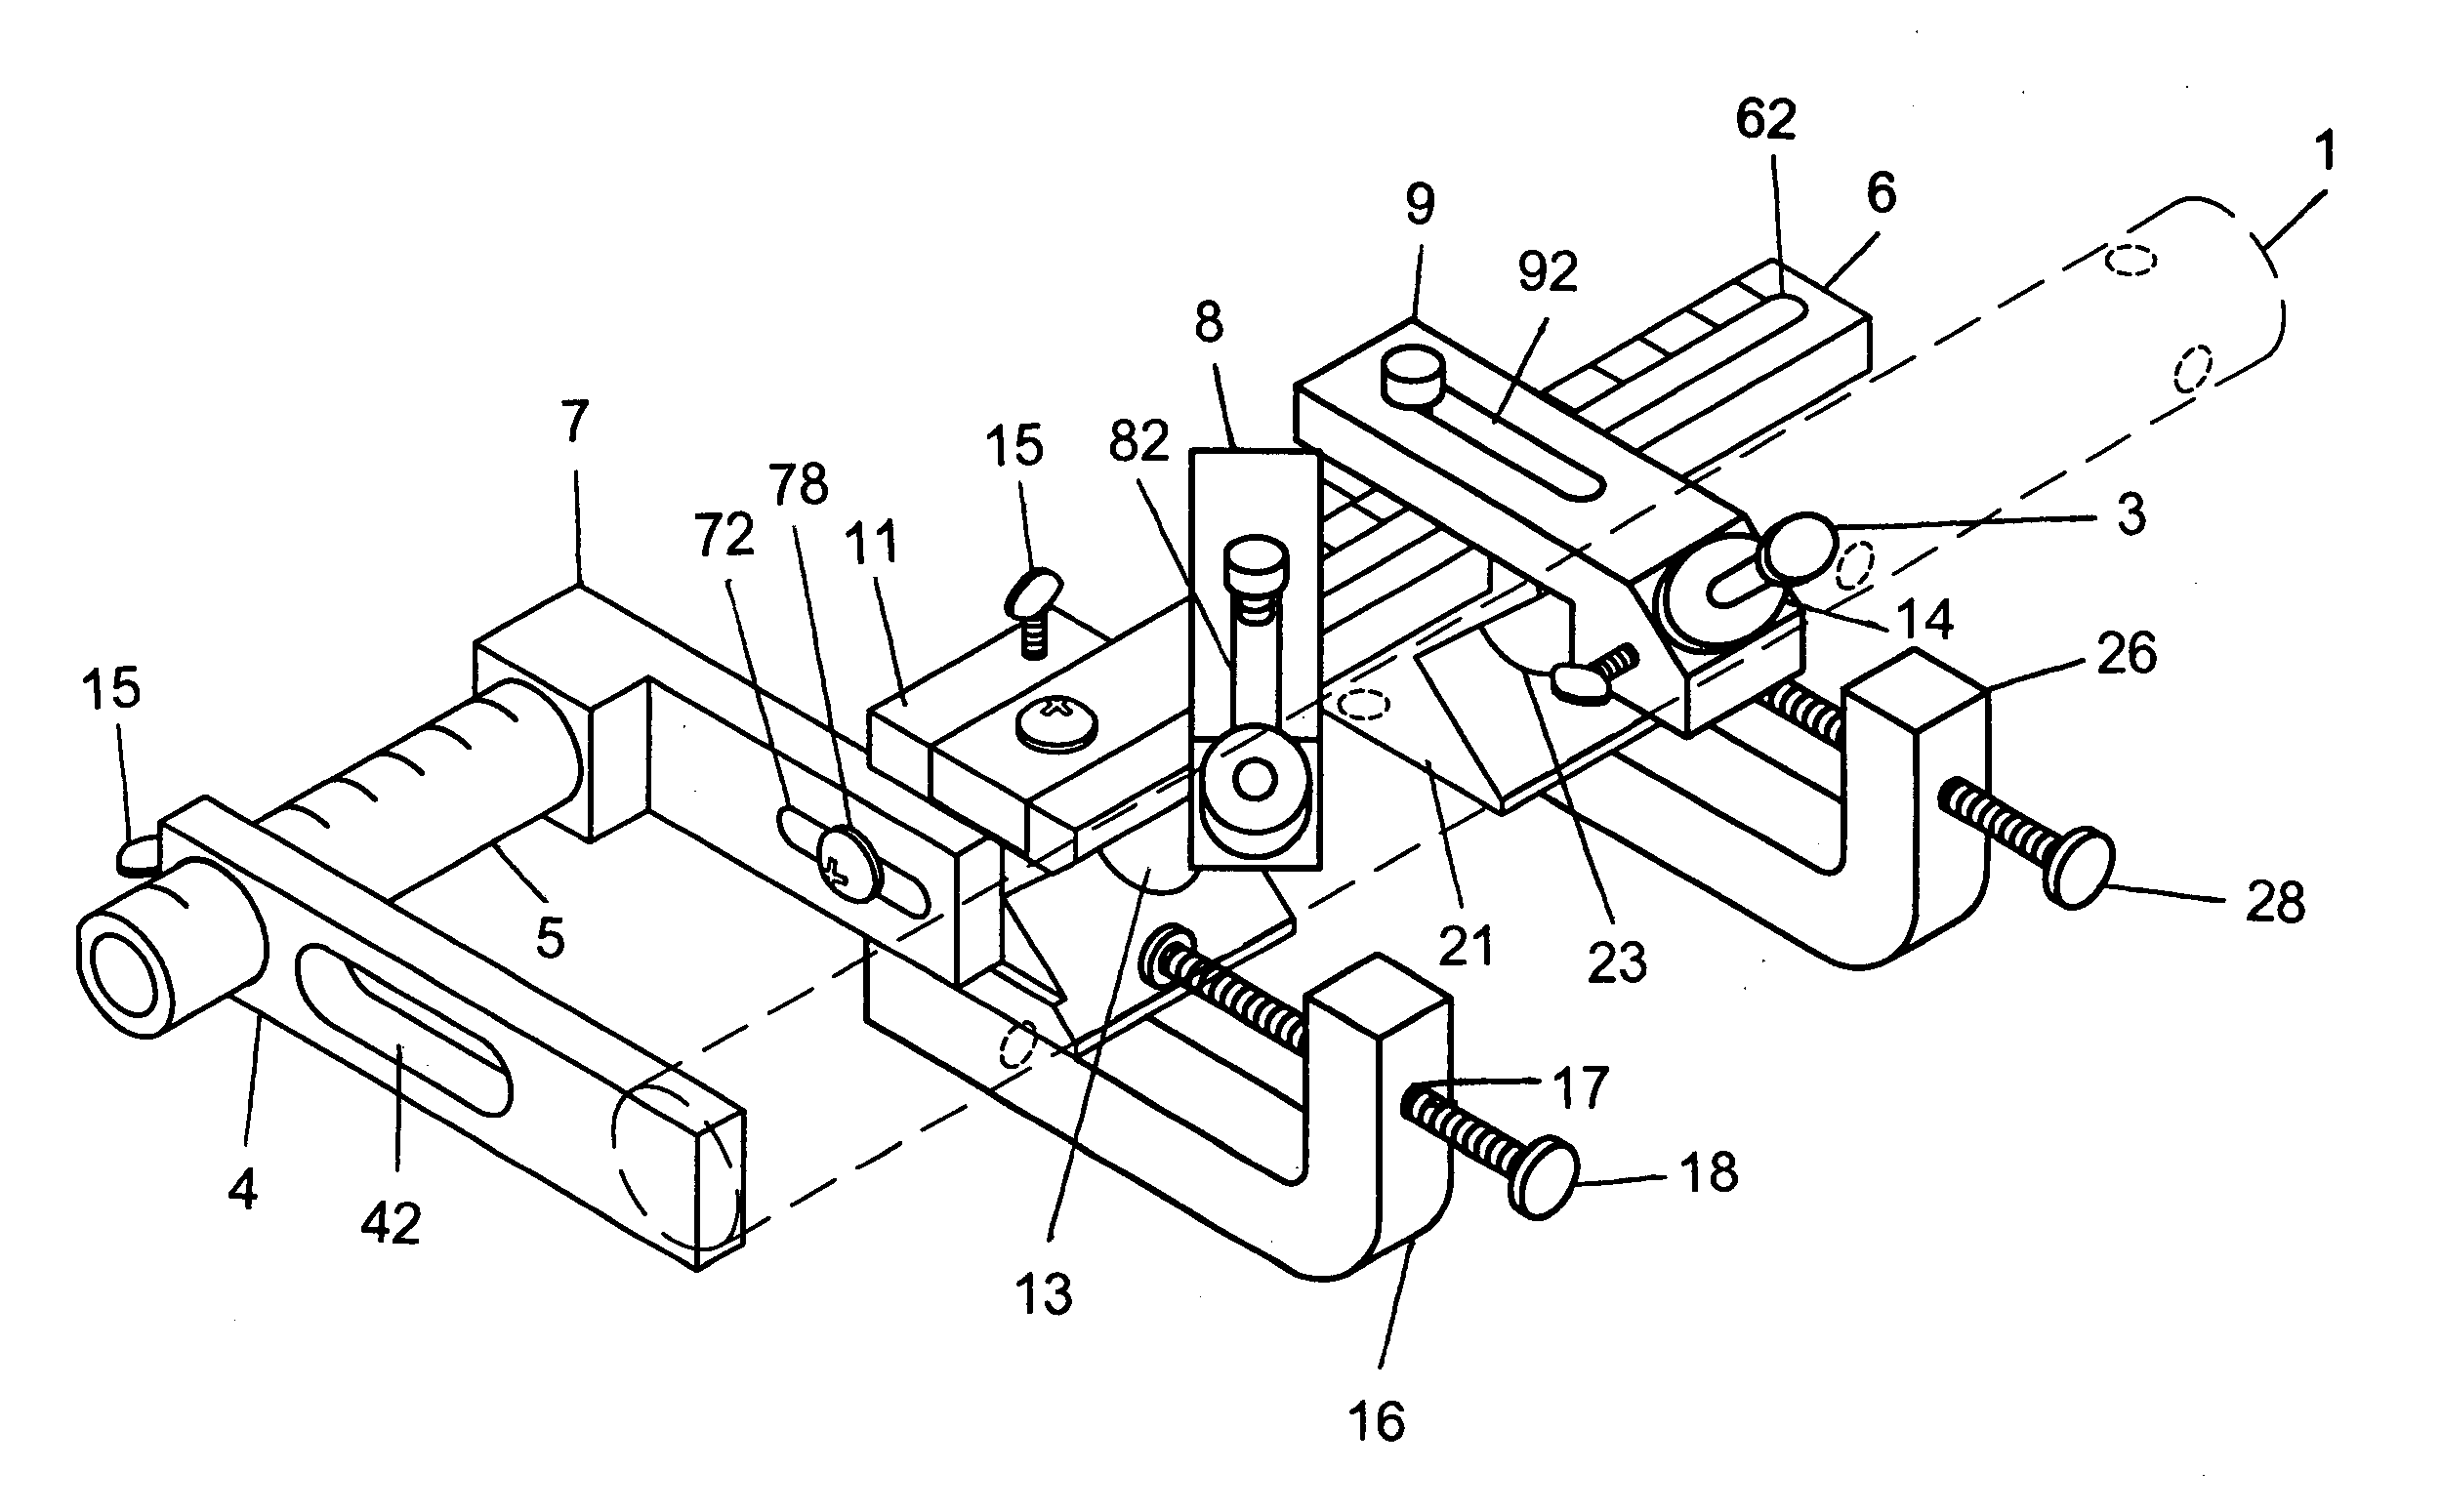 Fixturing device for drilling workpieces